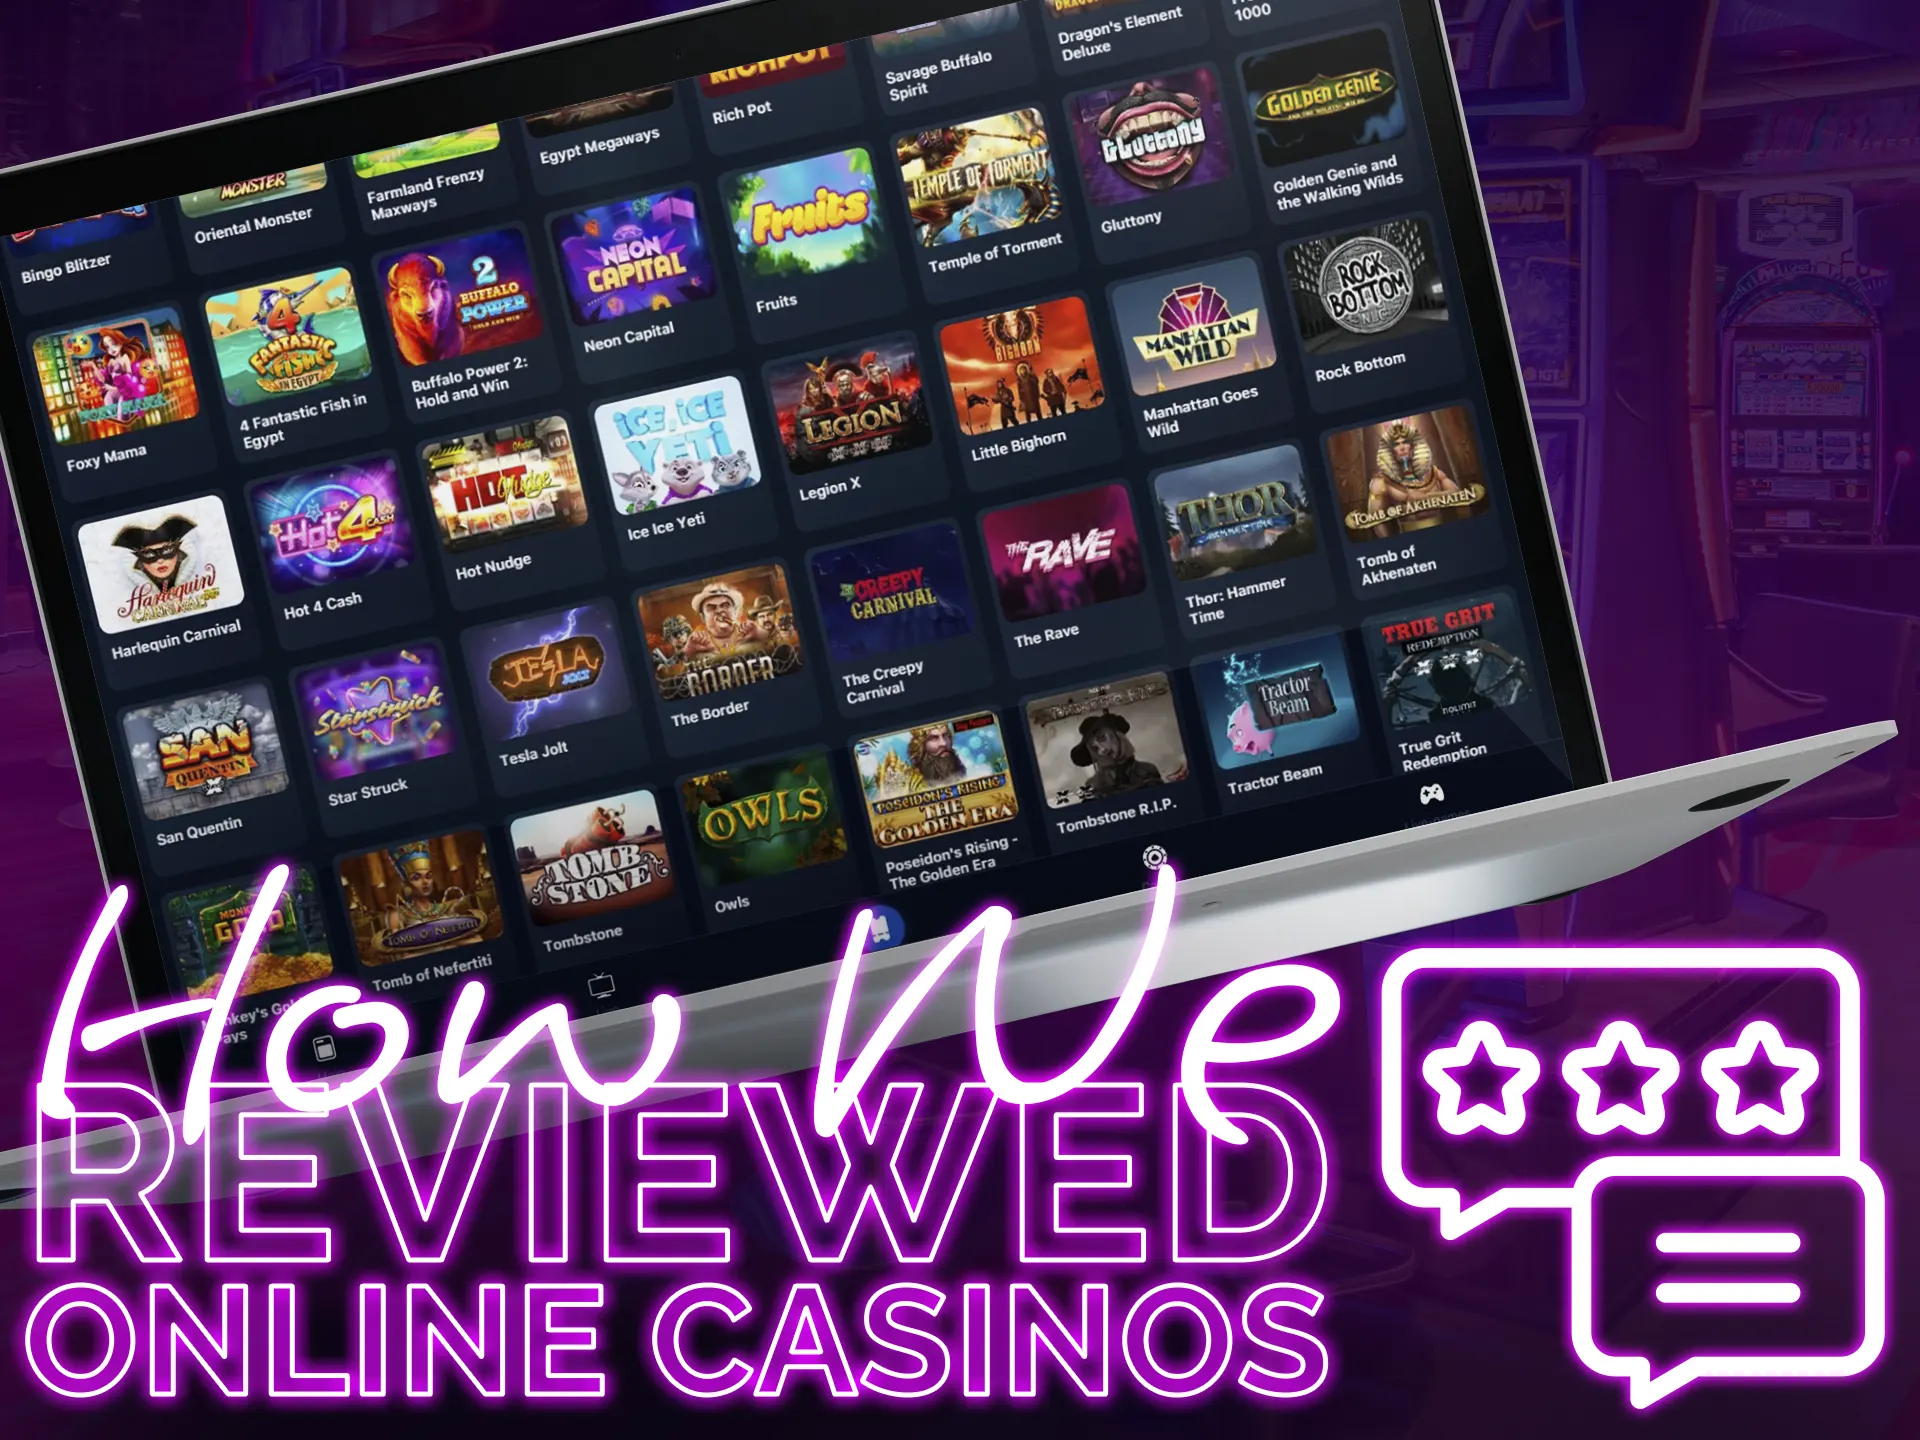 Find out what criteria we use to select the best slots casinos for you in our ranking.